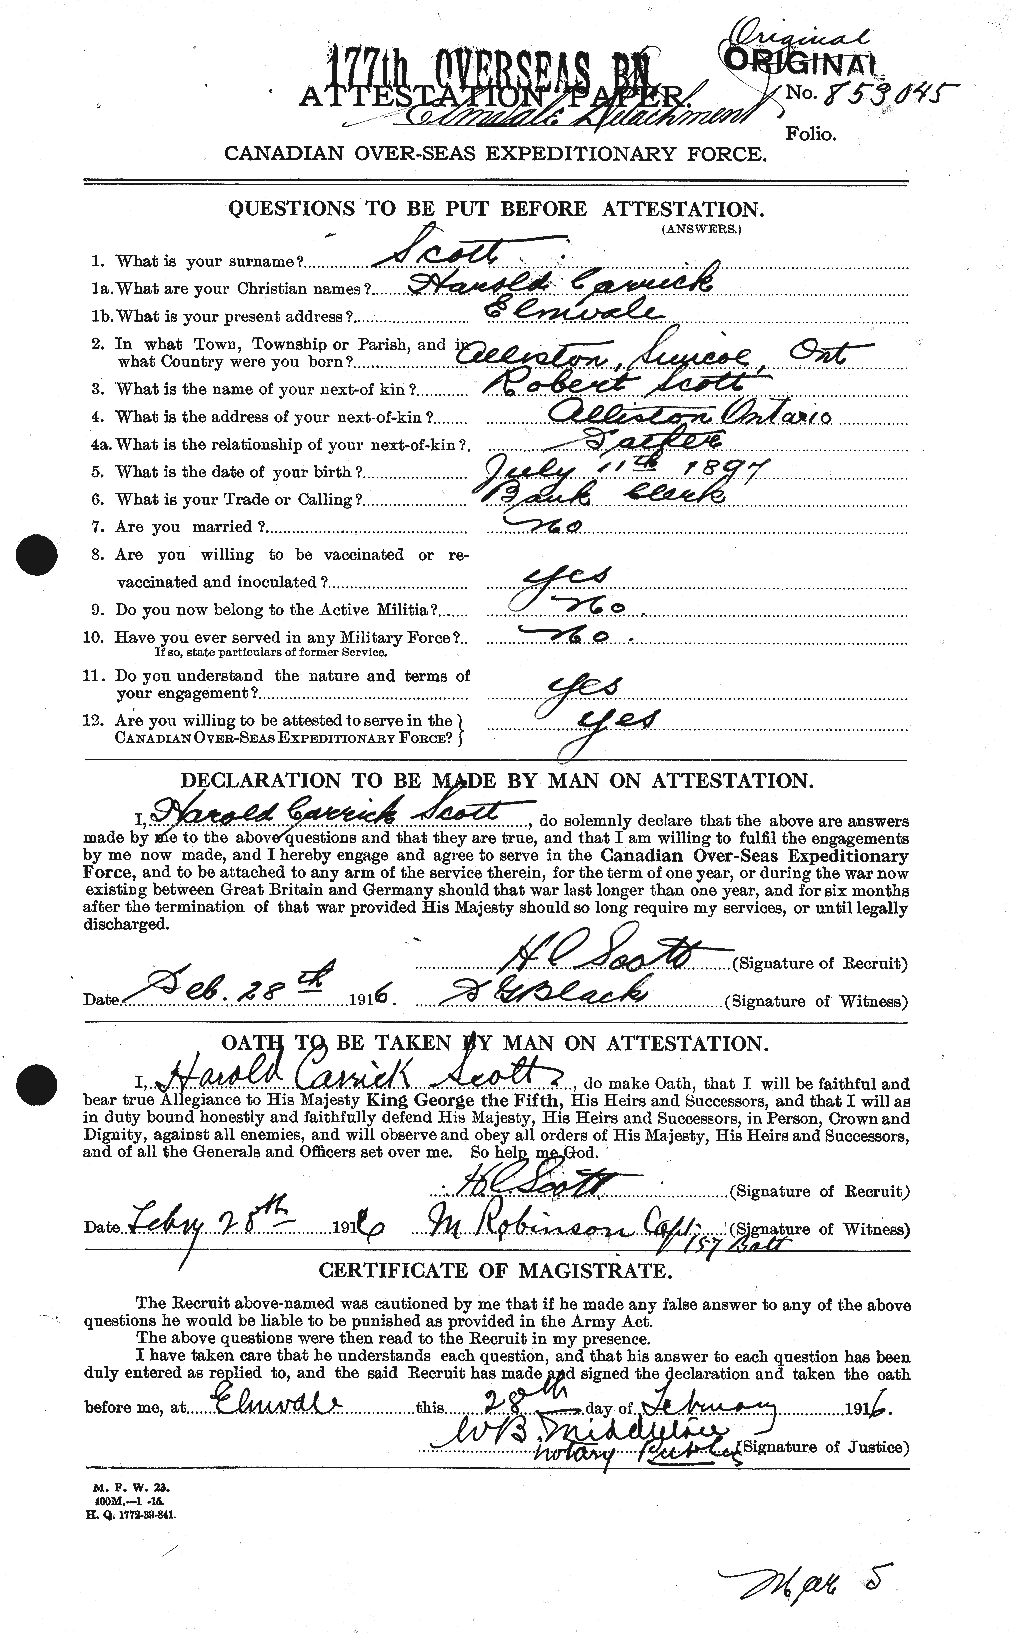 Personnel Records of the First World War - CEF 086339a